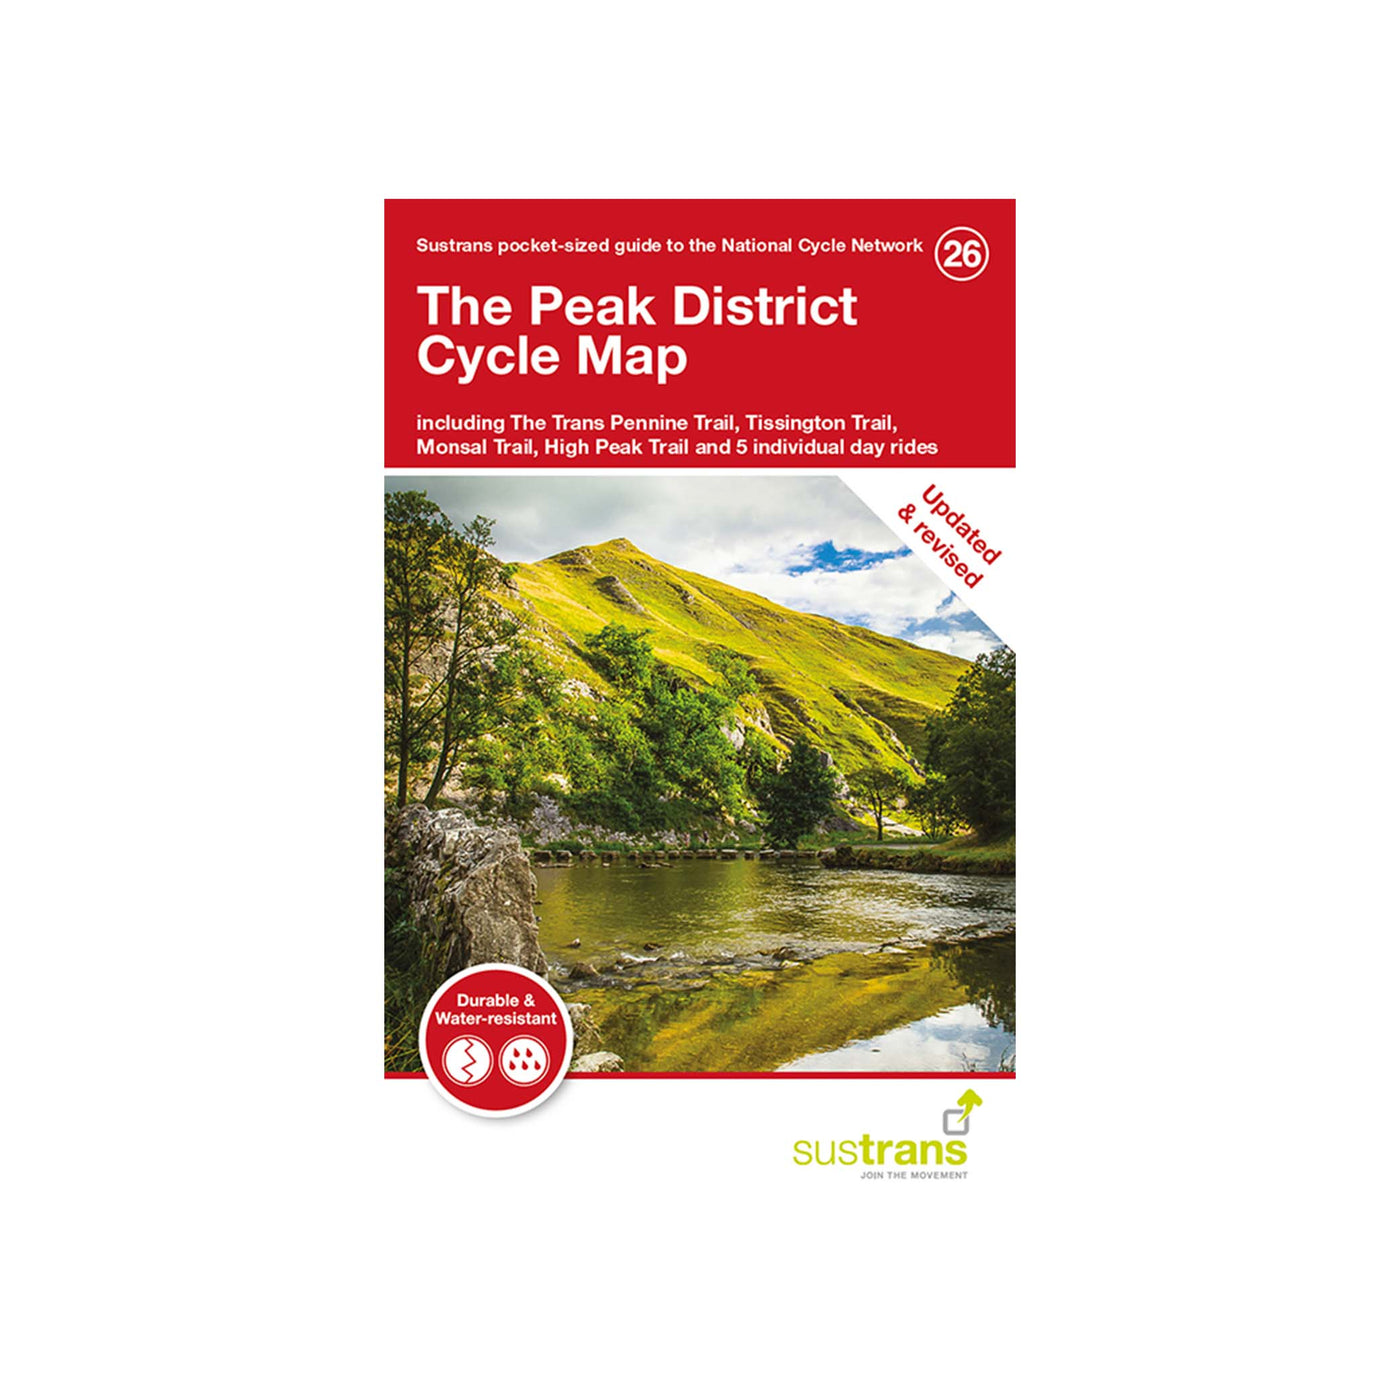 The Peak District Cycle Map, including the Trans Pennine Trail, Tissington Trail, Monsal Trail, High Peak Trail and 5 individual day rides.